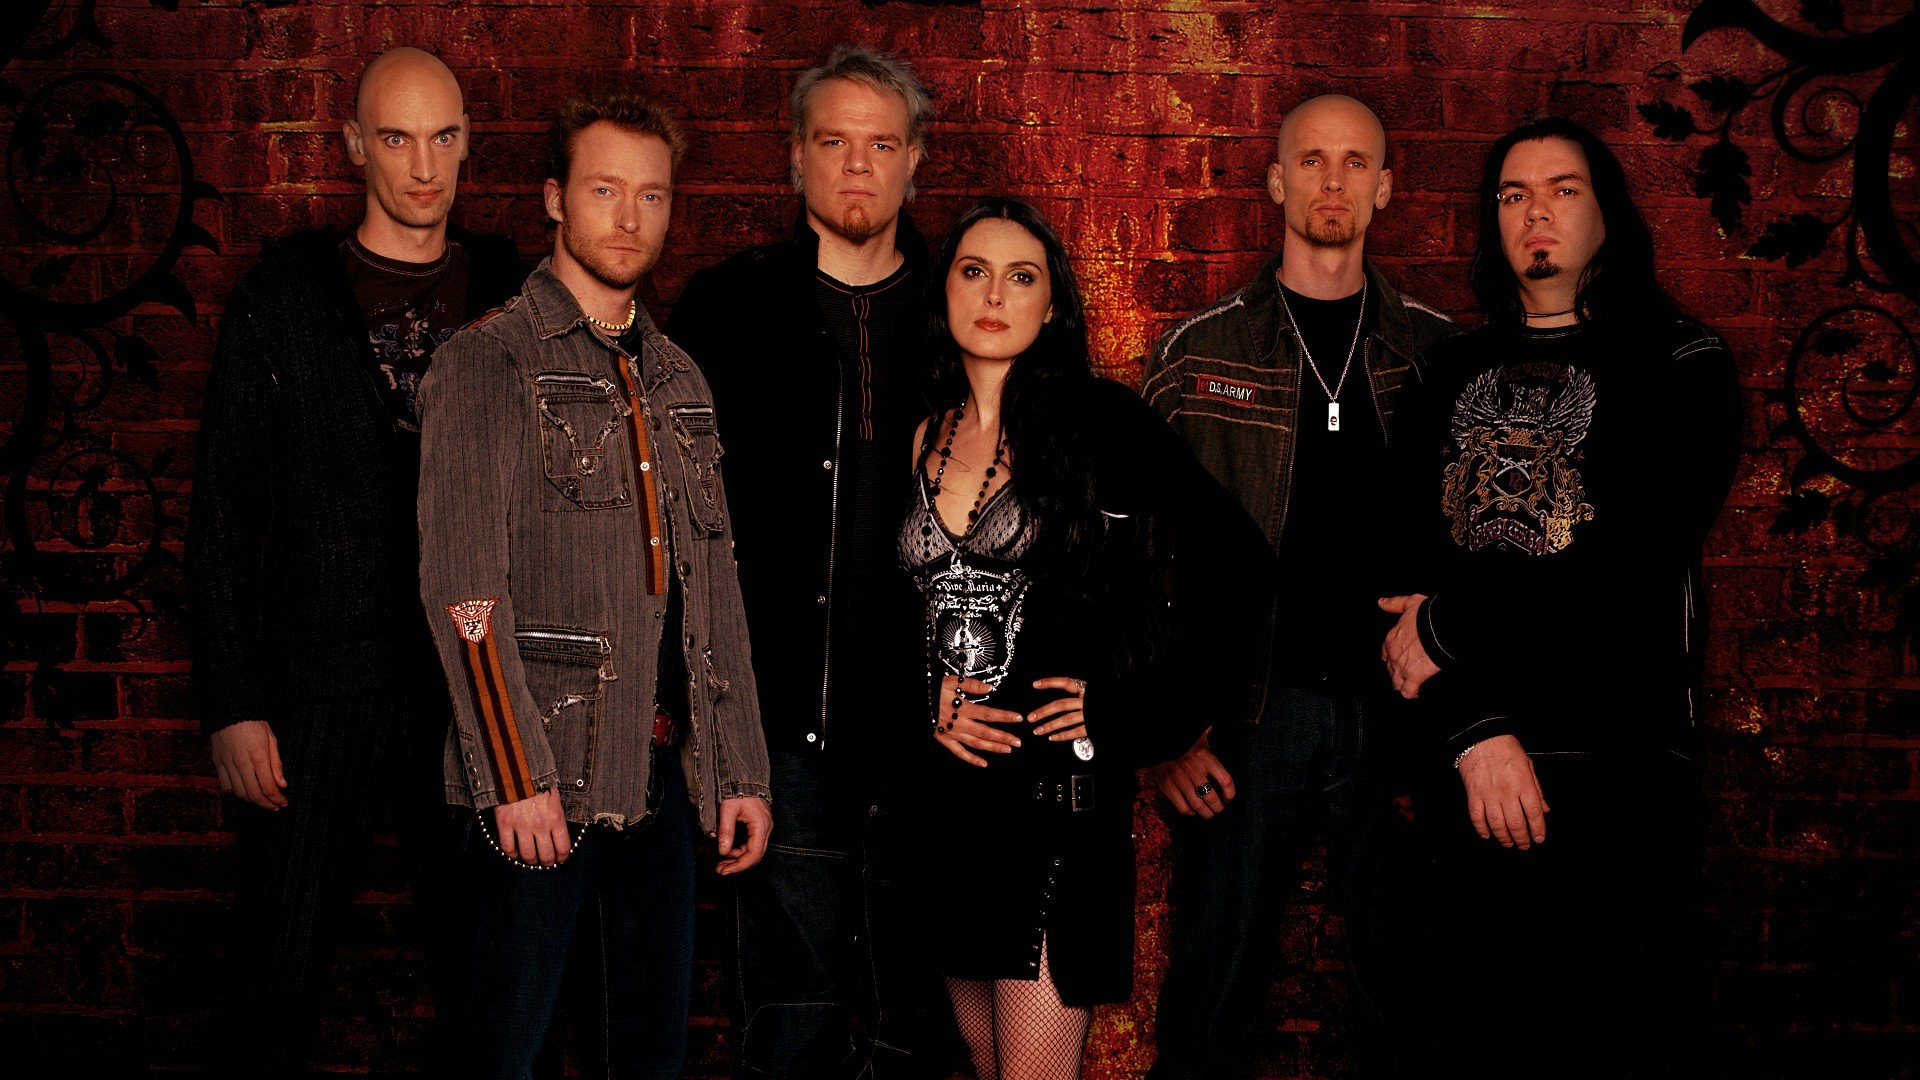 Awesome Within Temptation free wallpaper ID:168988 for full hd computer